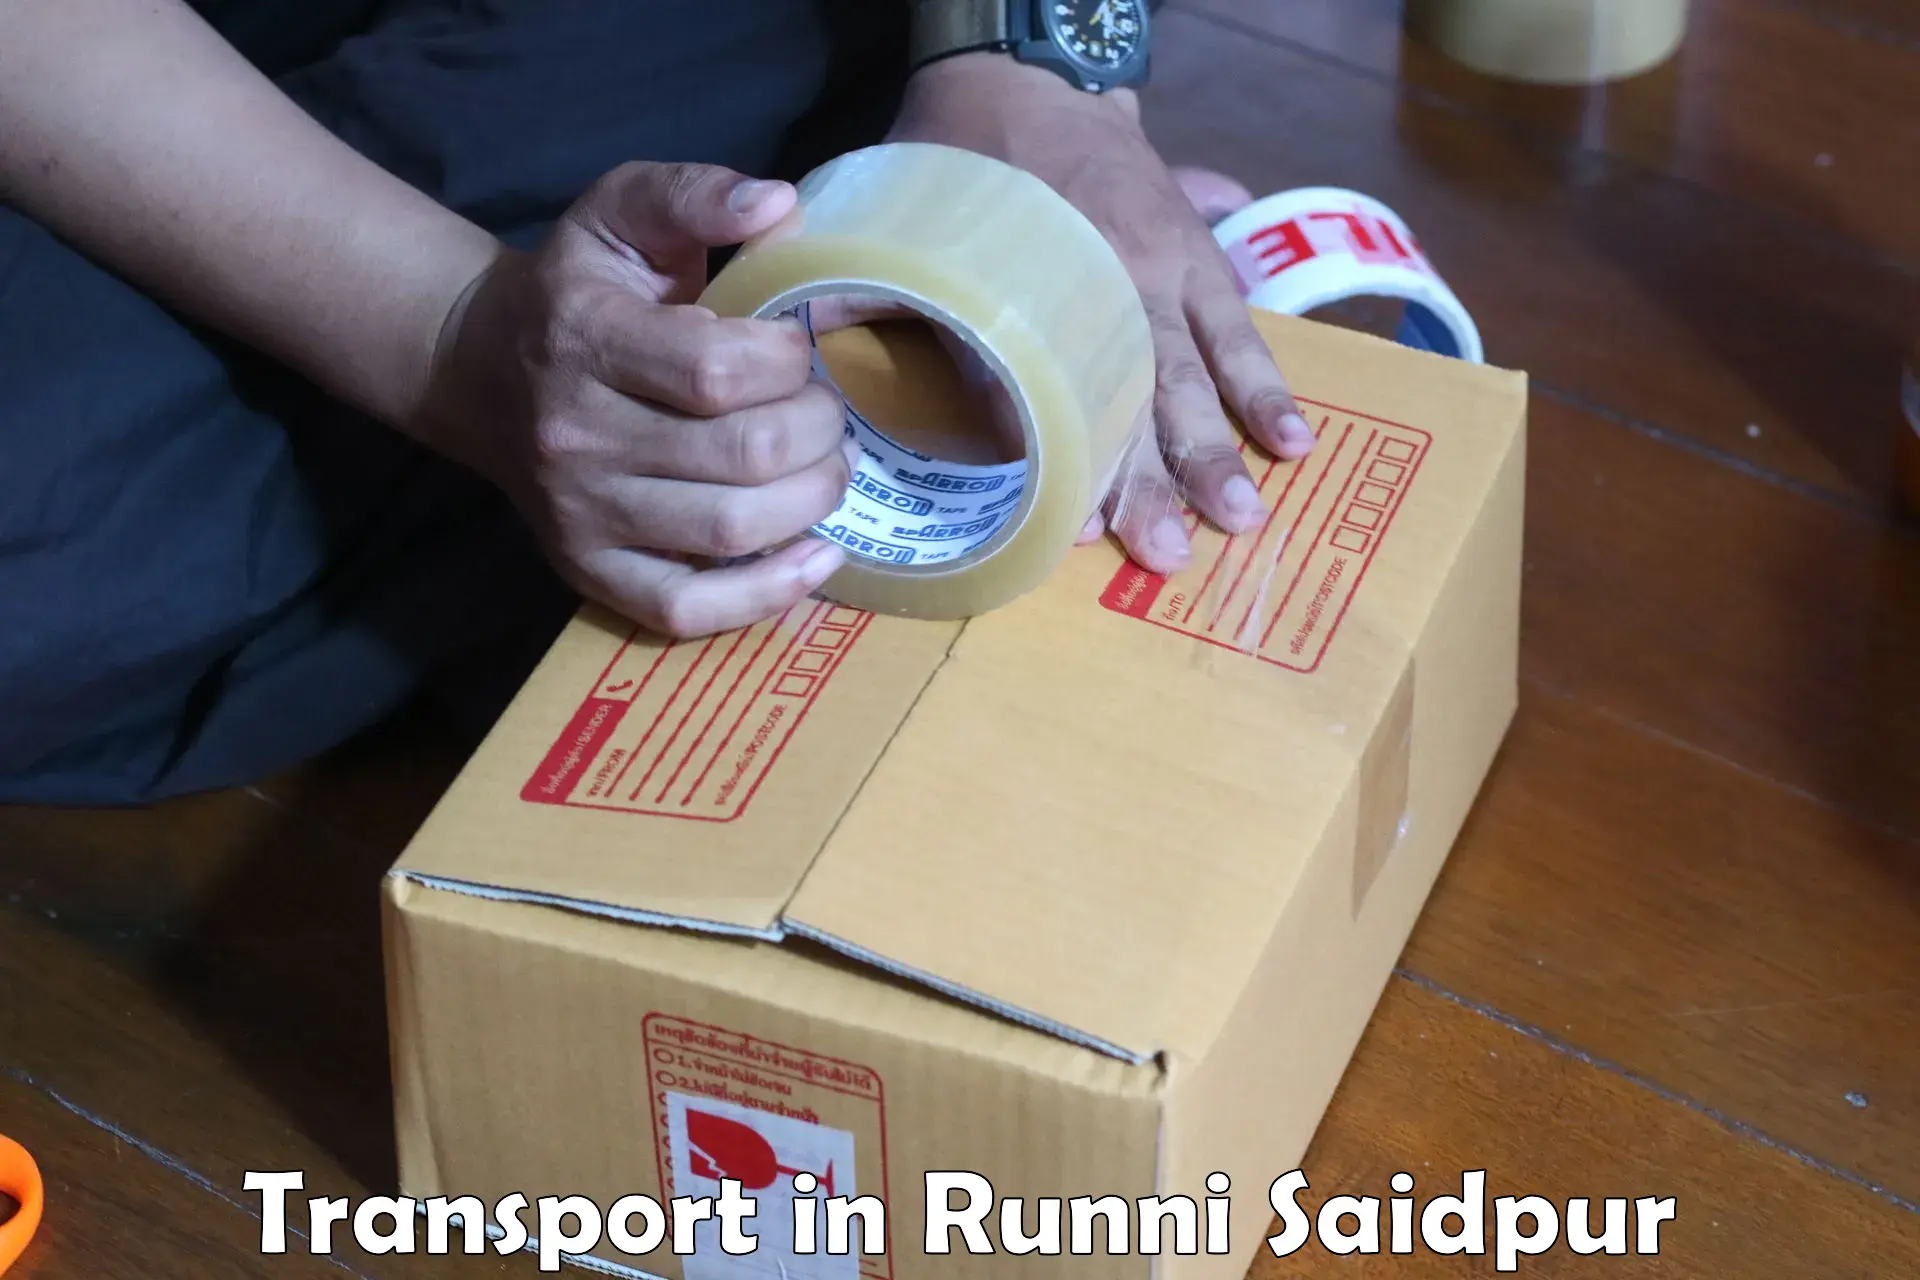 Package delivery services in Runni Saidpur